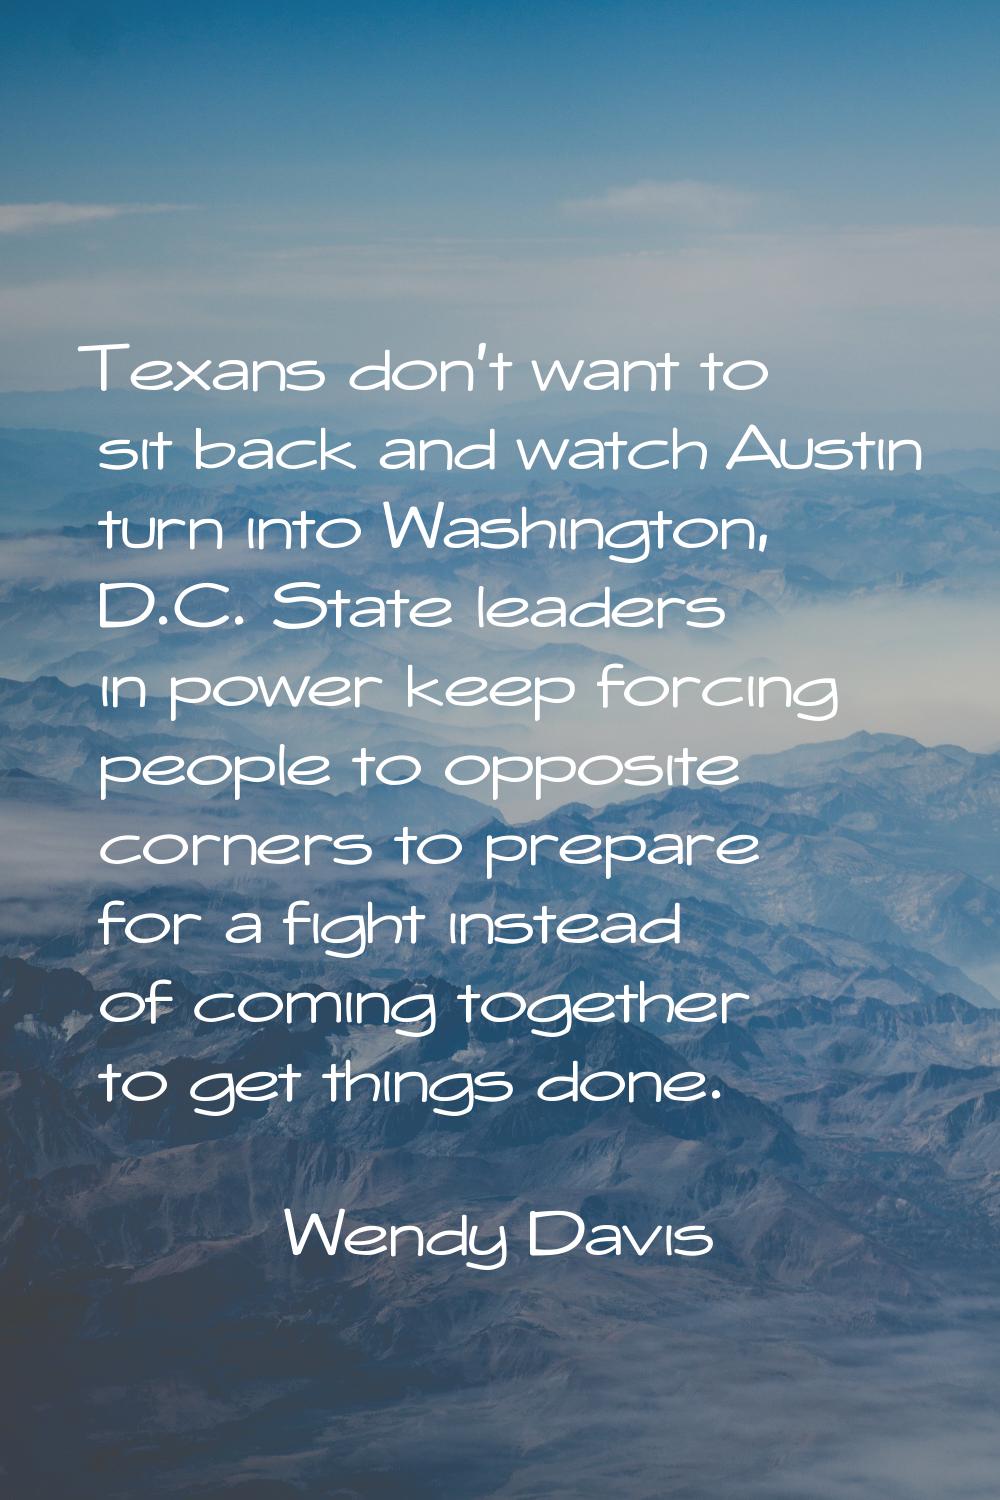 Texans don't want to sit back and watch Austin turn into Washington, D.C. State leaders in power ke